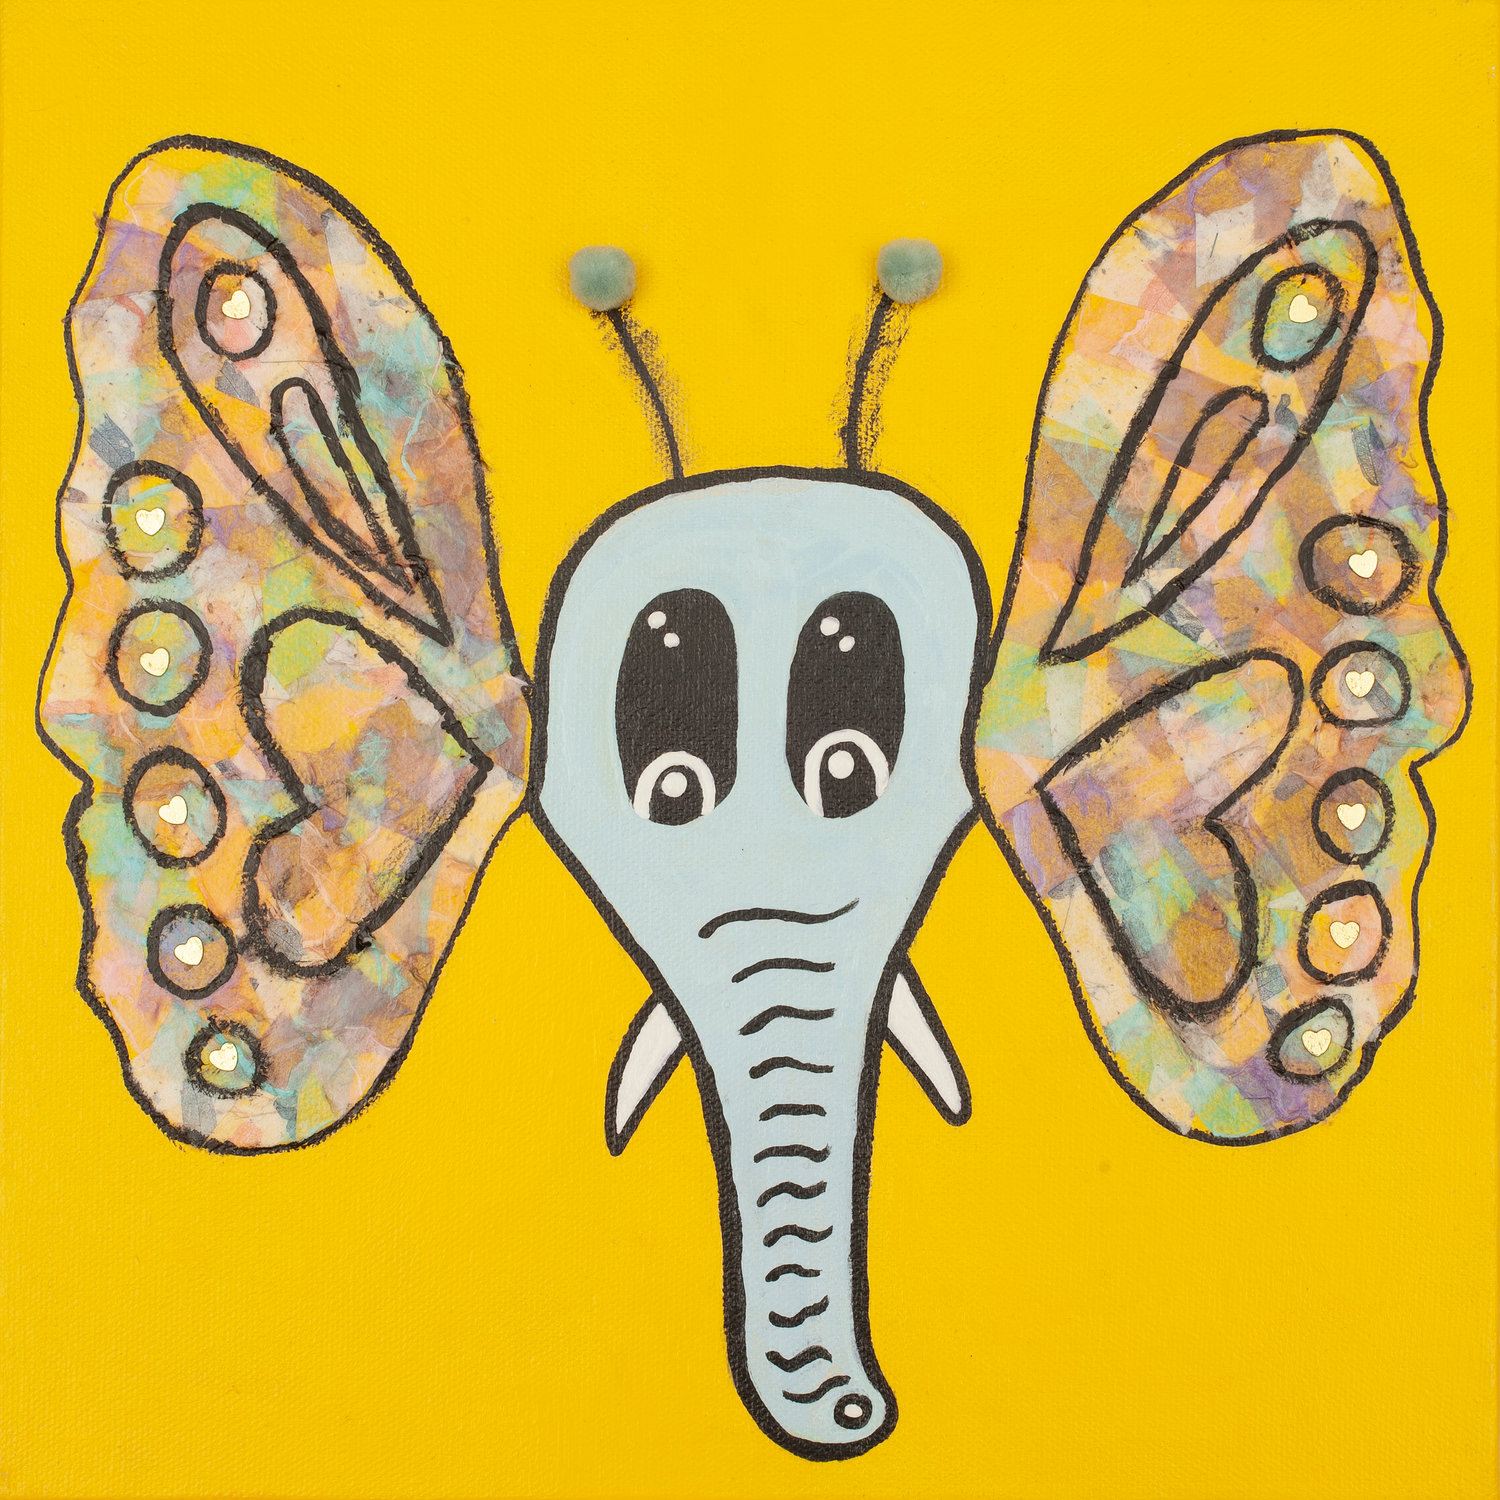 Hajar, age 13, created “An Elefly.” Acrylic and mixed media on canvas, 12 x 12 inches. 
Image courtesy of Art with a Heart in Healthcare and Laird.